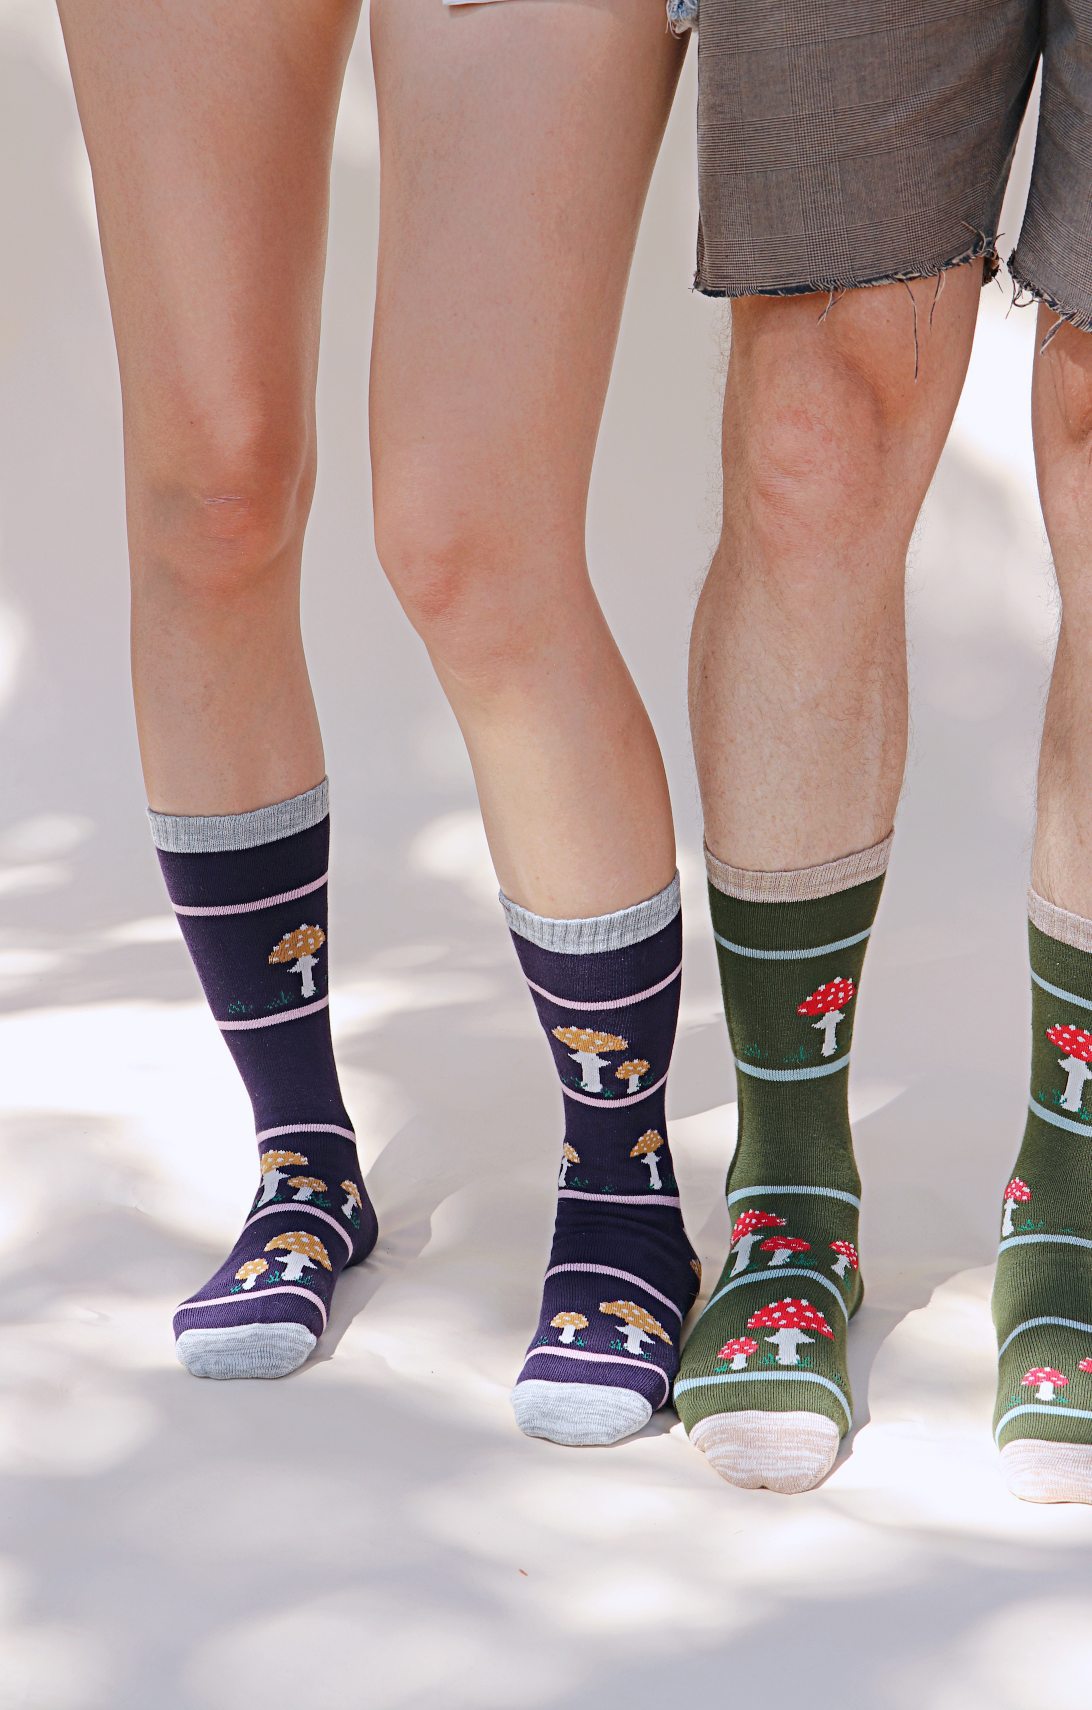 TABBISOCKS brand Replant Pairs Mushroom Socks in green Olive color with red mushroom design with white dots all over and ivory point color at the toe and mouth of the socks, lower body of a man wearing Grey half pants and a woman wearing socks in purple with brown mushroom design with Grey point color all over.